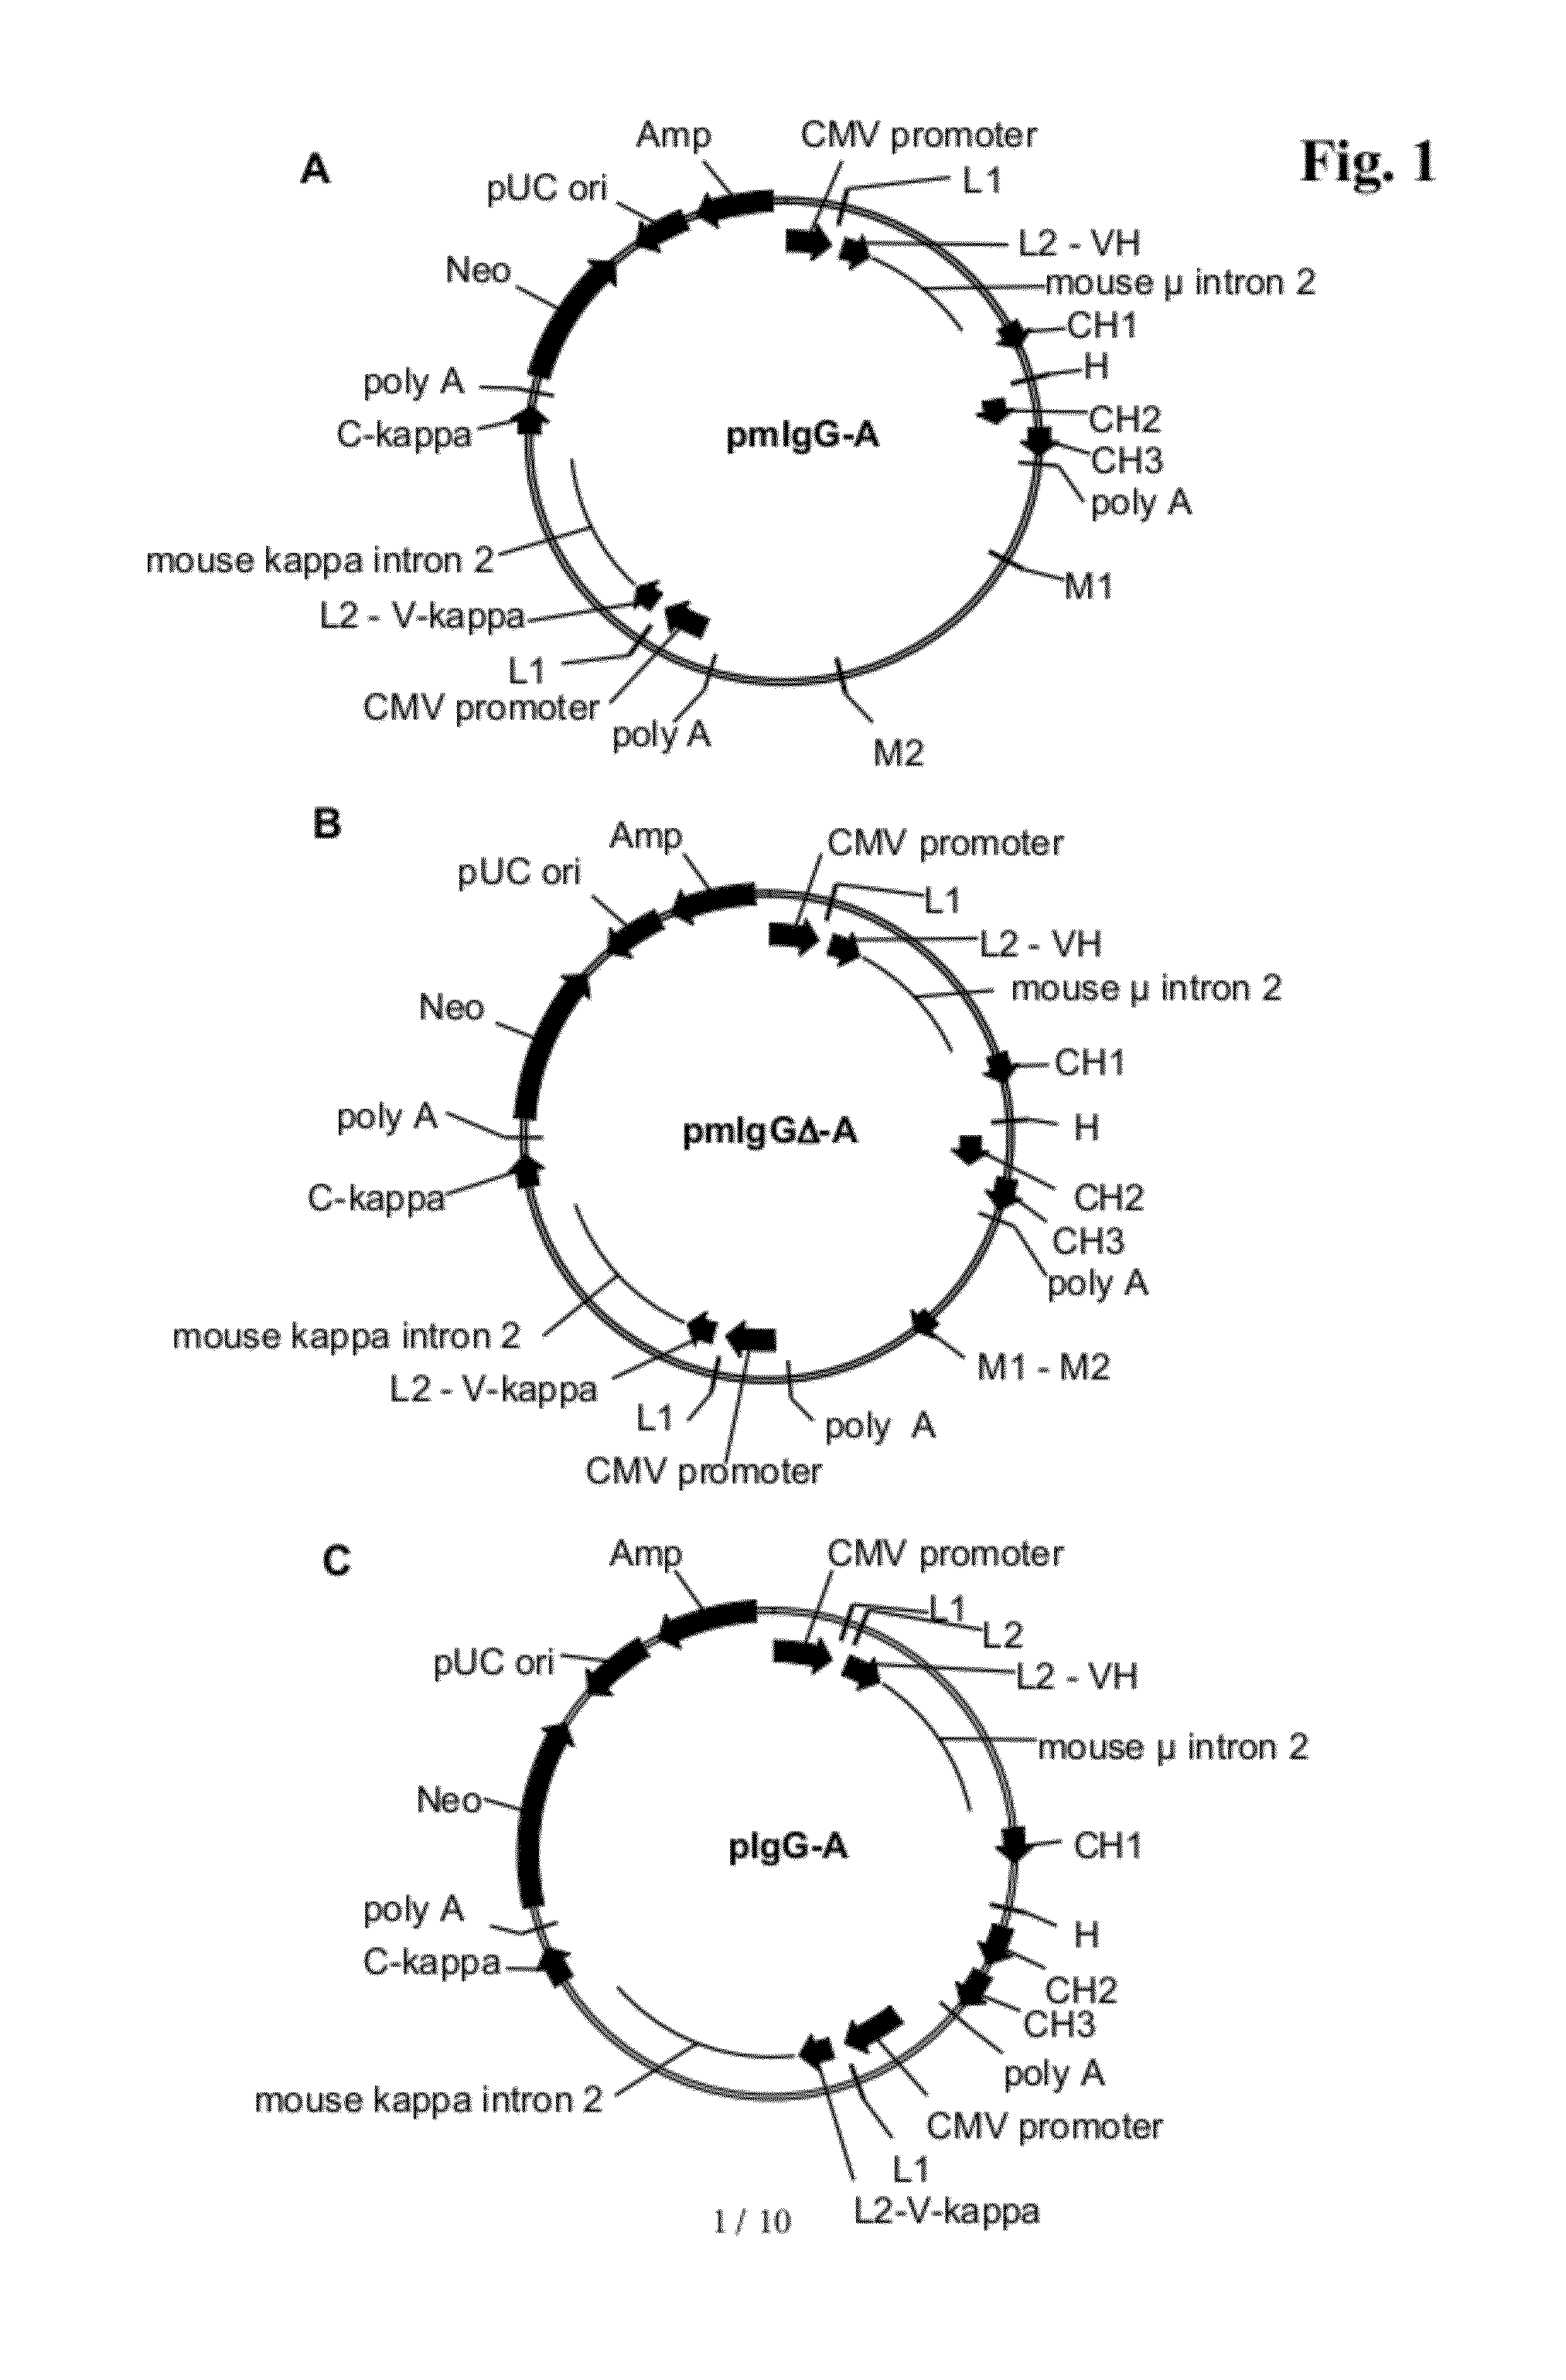 Polypeptide producing cells